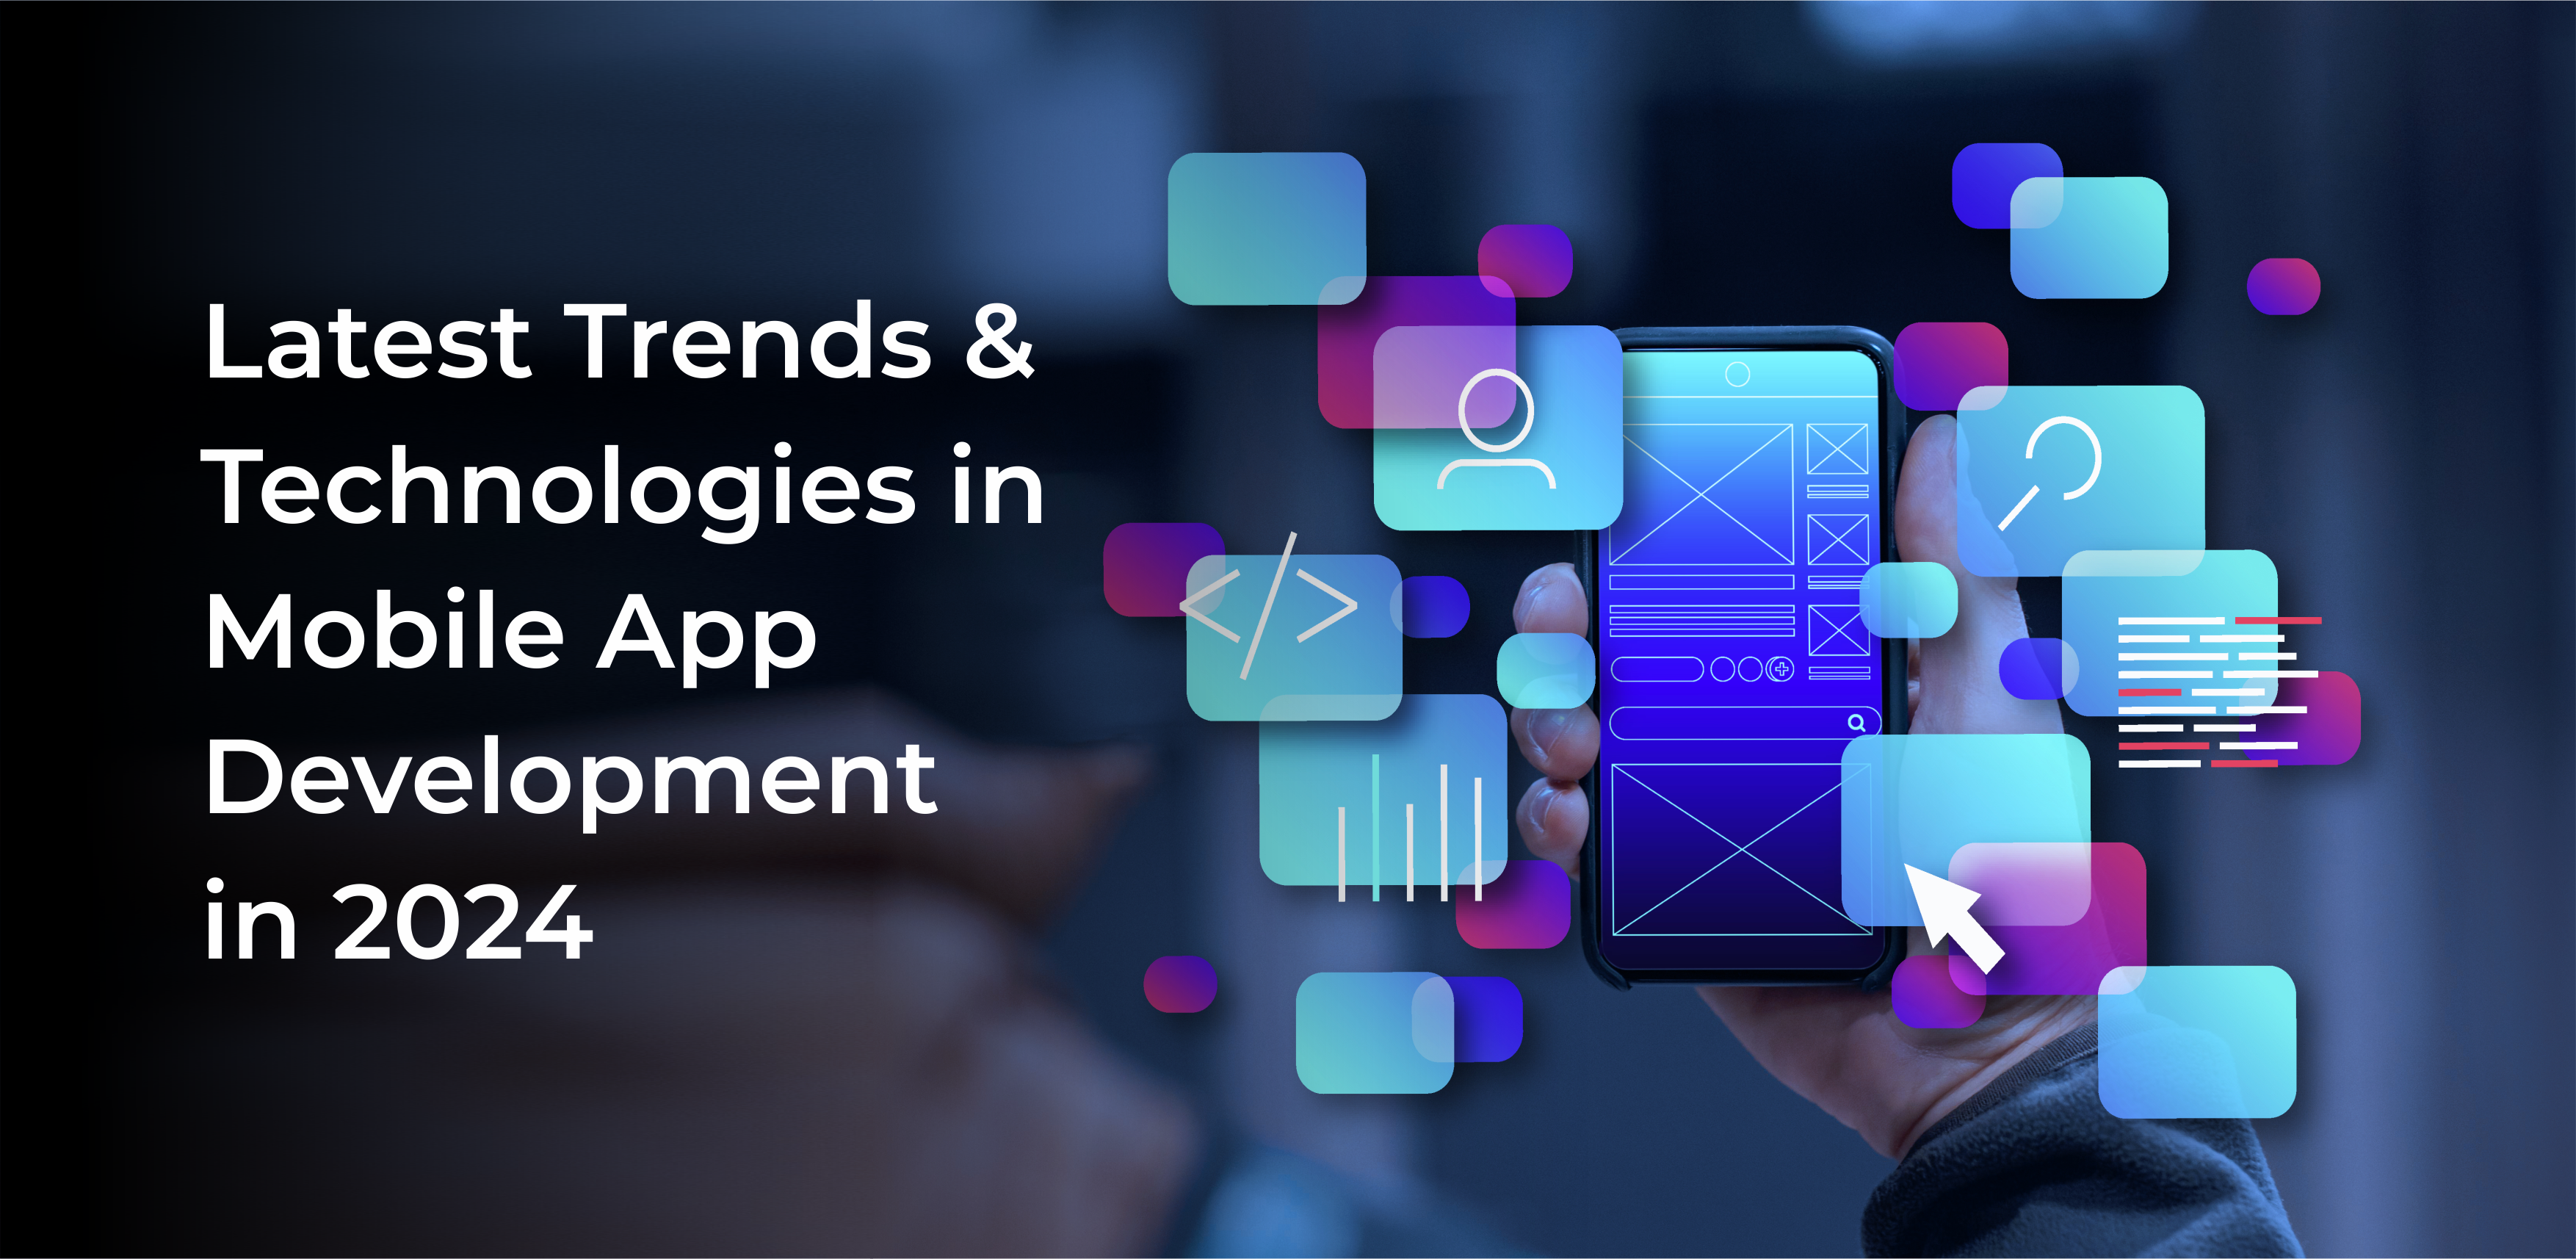 Latest Trends and Technologies in Mobile App Development in 2024